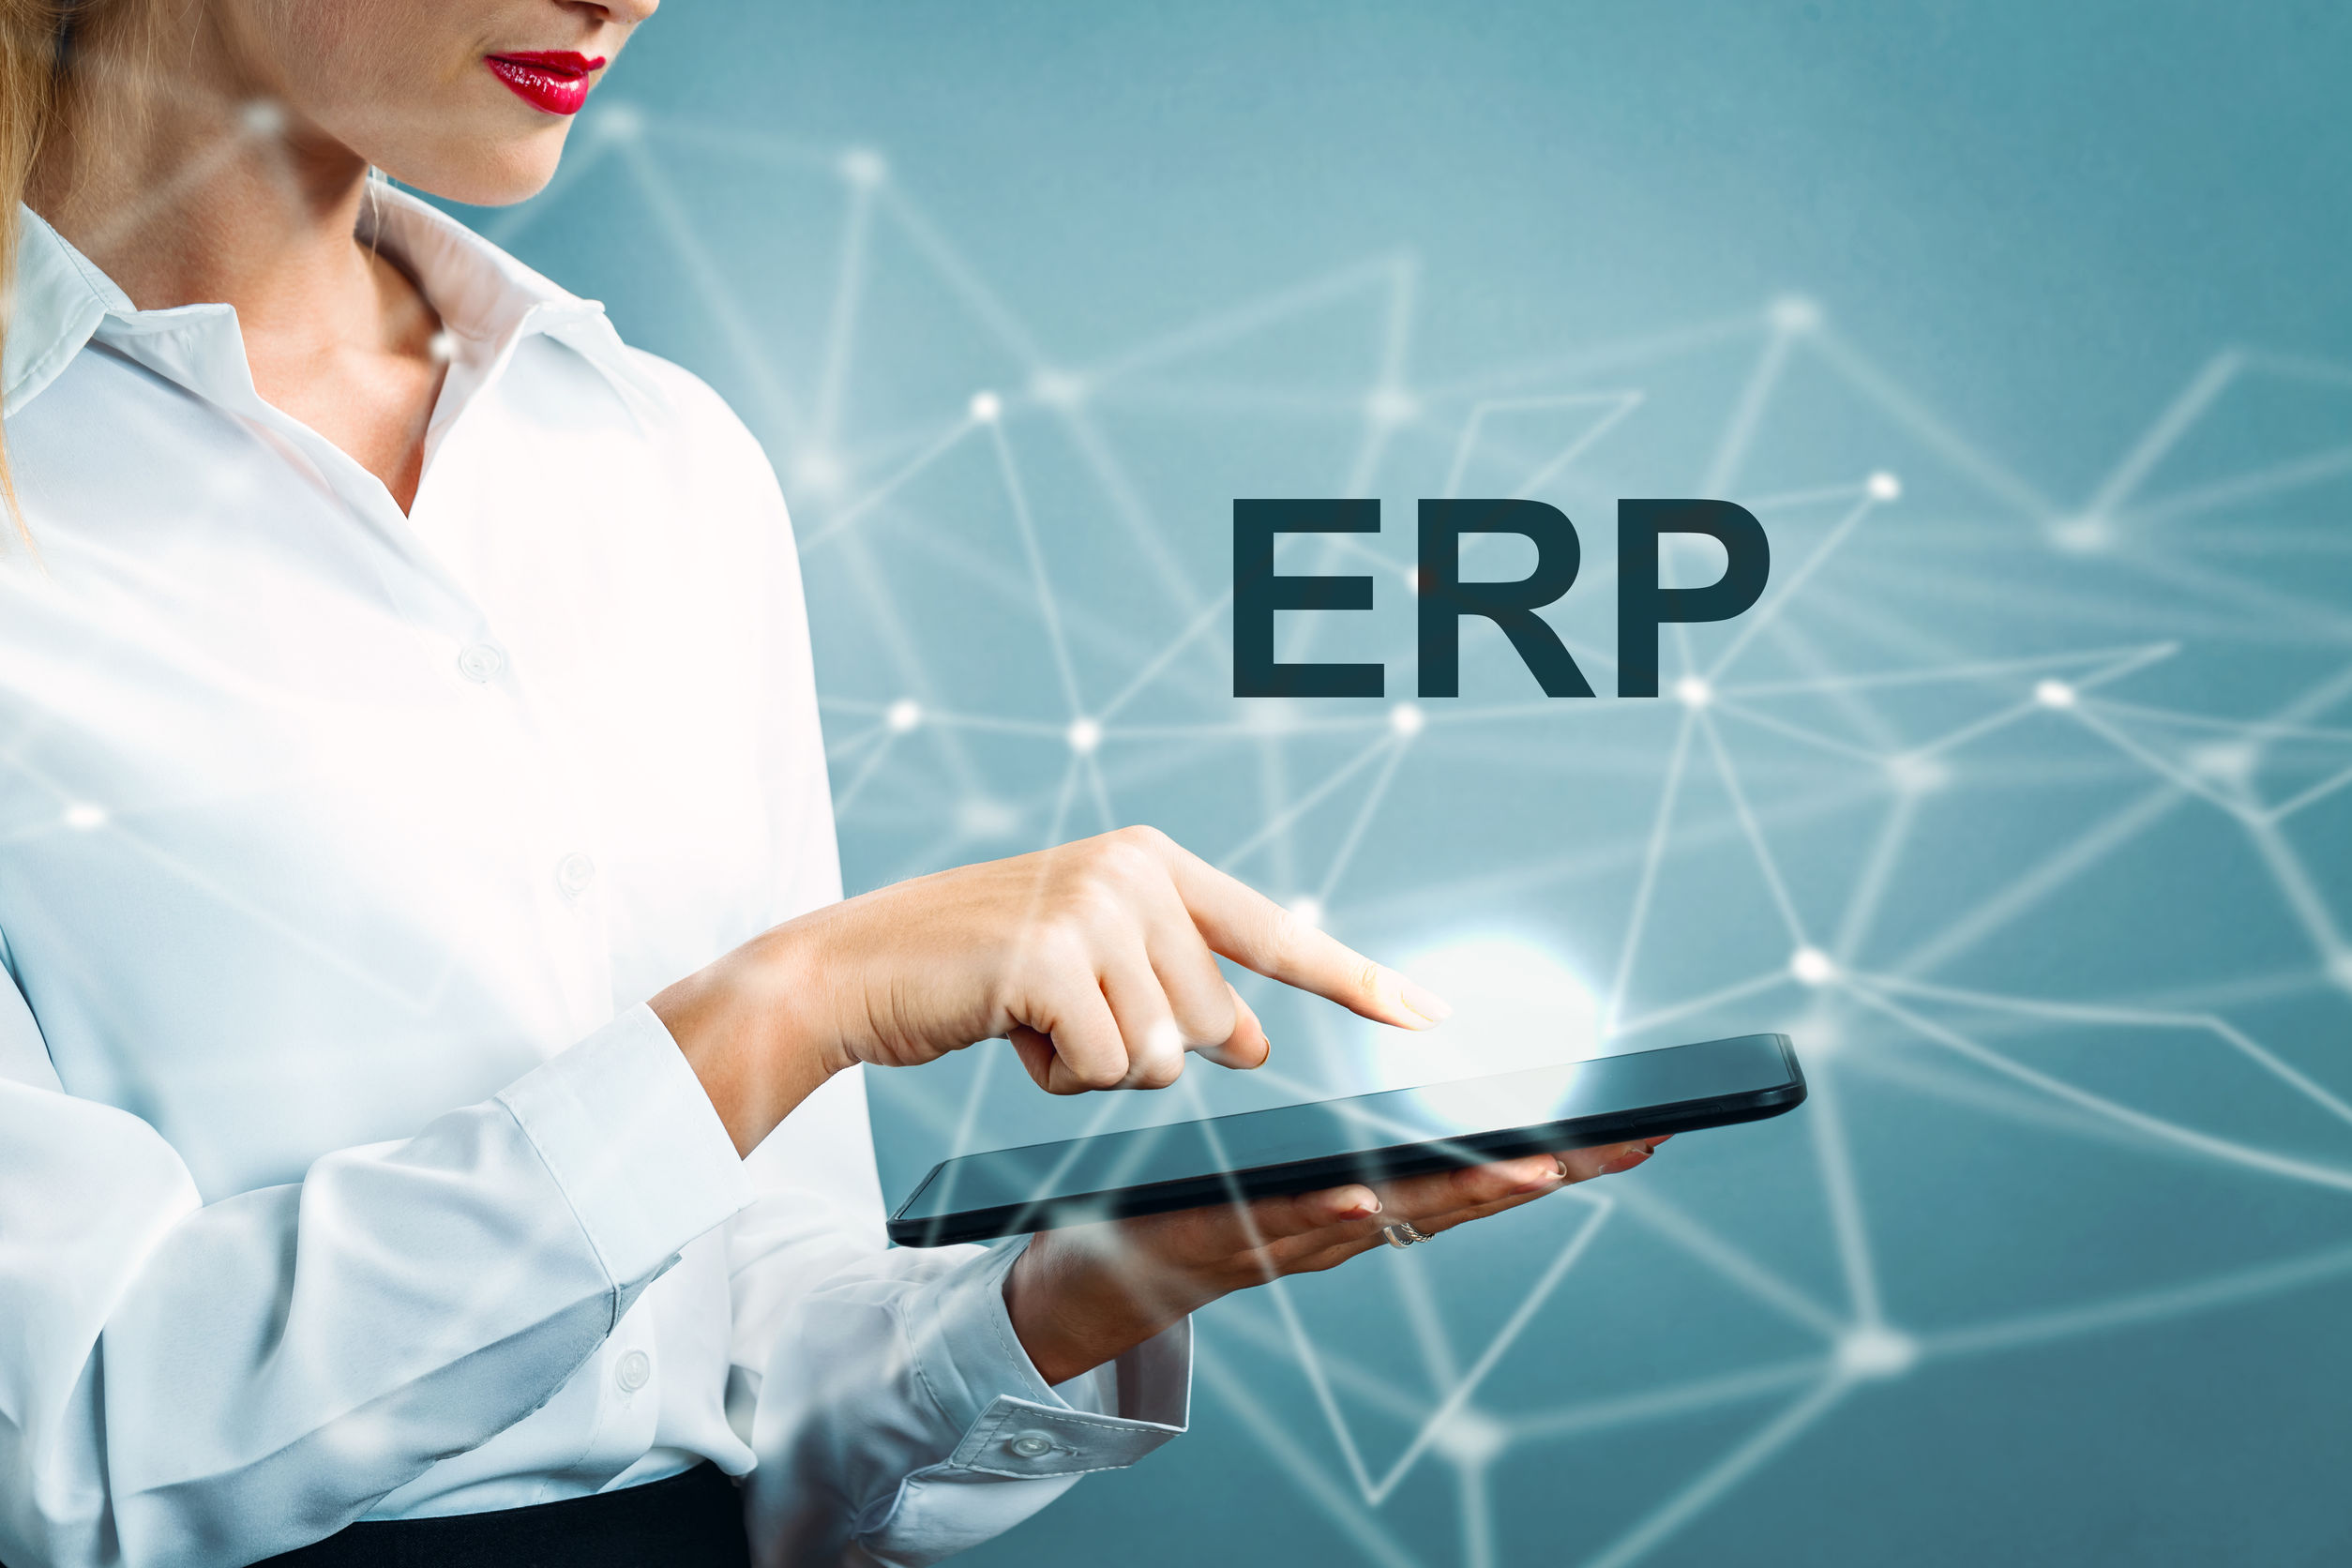 Can ERP Improve Your Company’s Operations?